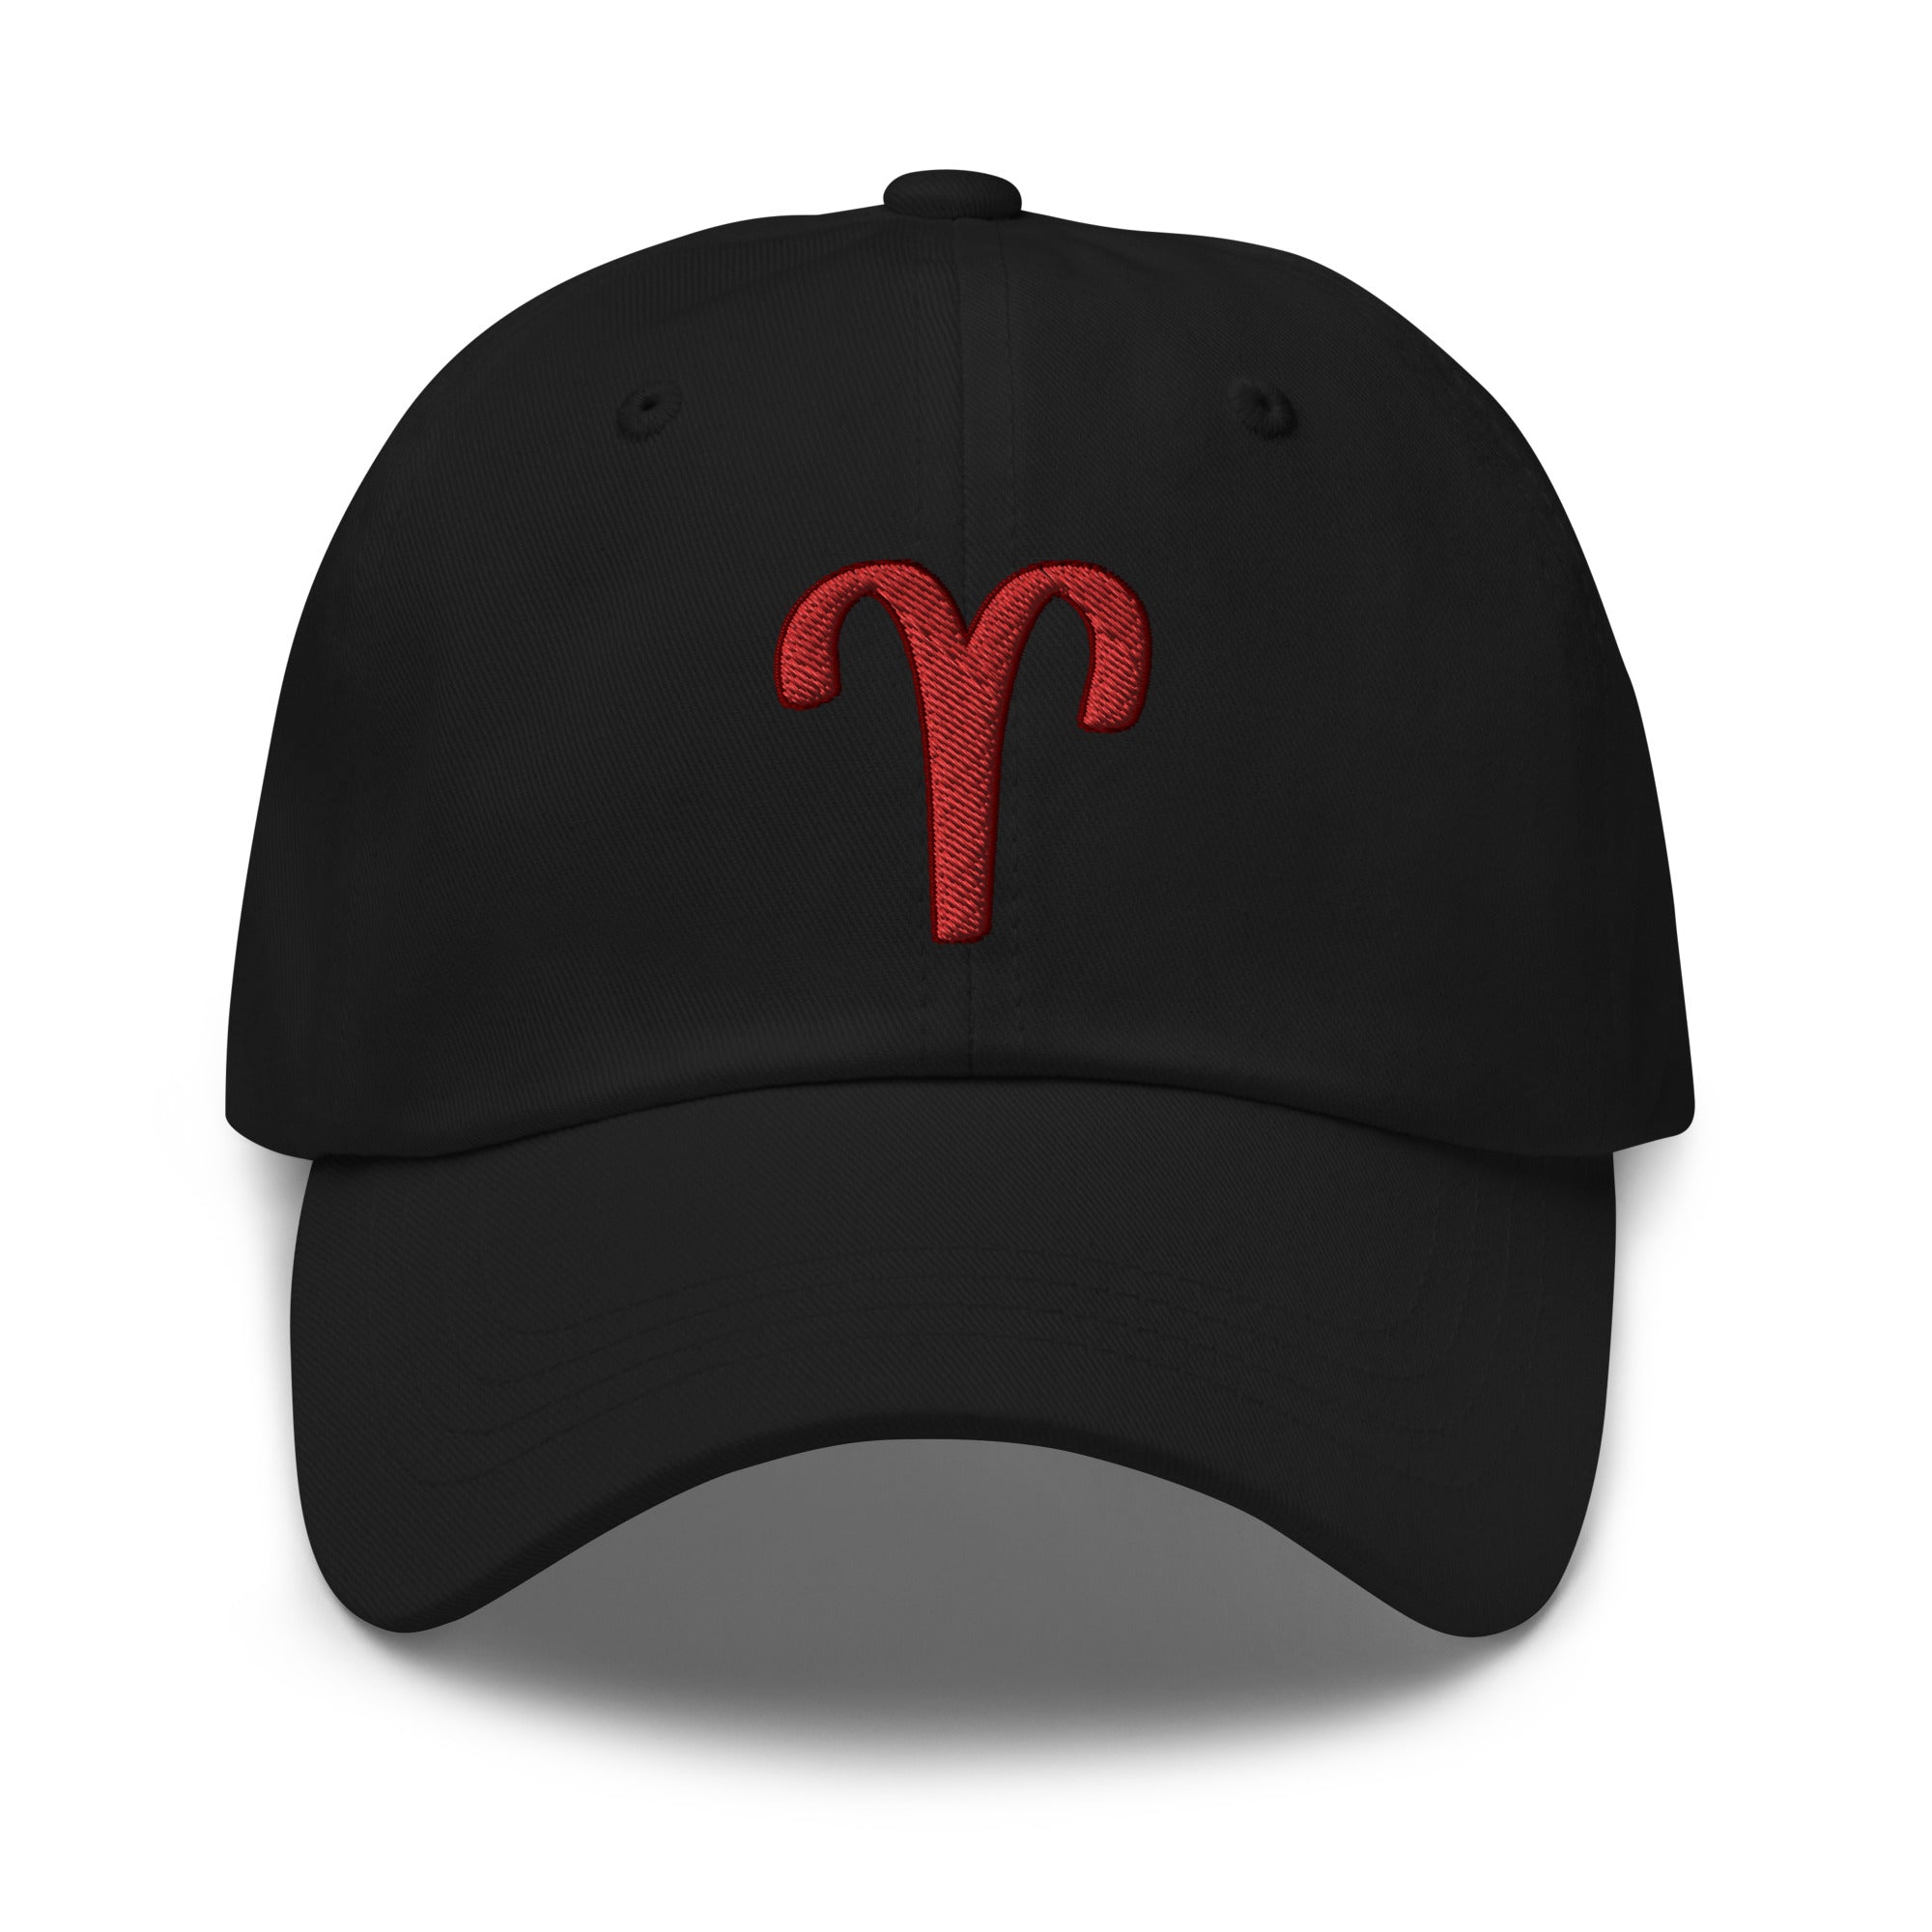 Zodiac Sign Aries Embroidered Baseball Cap Astrology Horoscope Dad hat - Edge of Life Designs